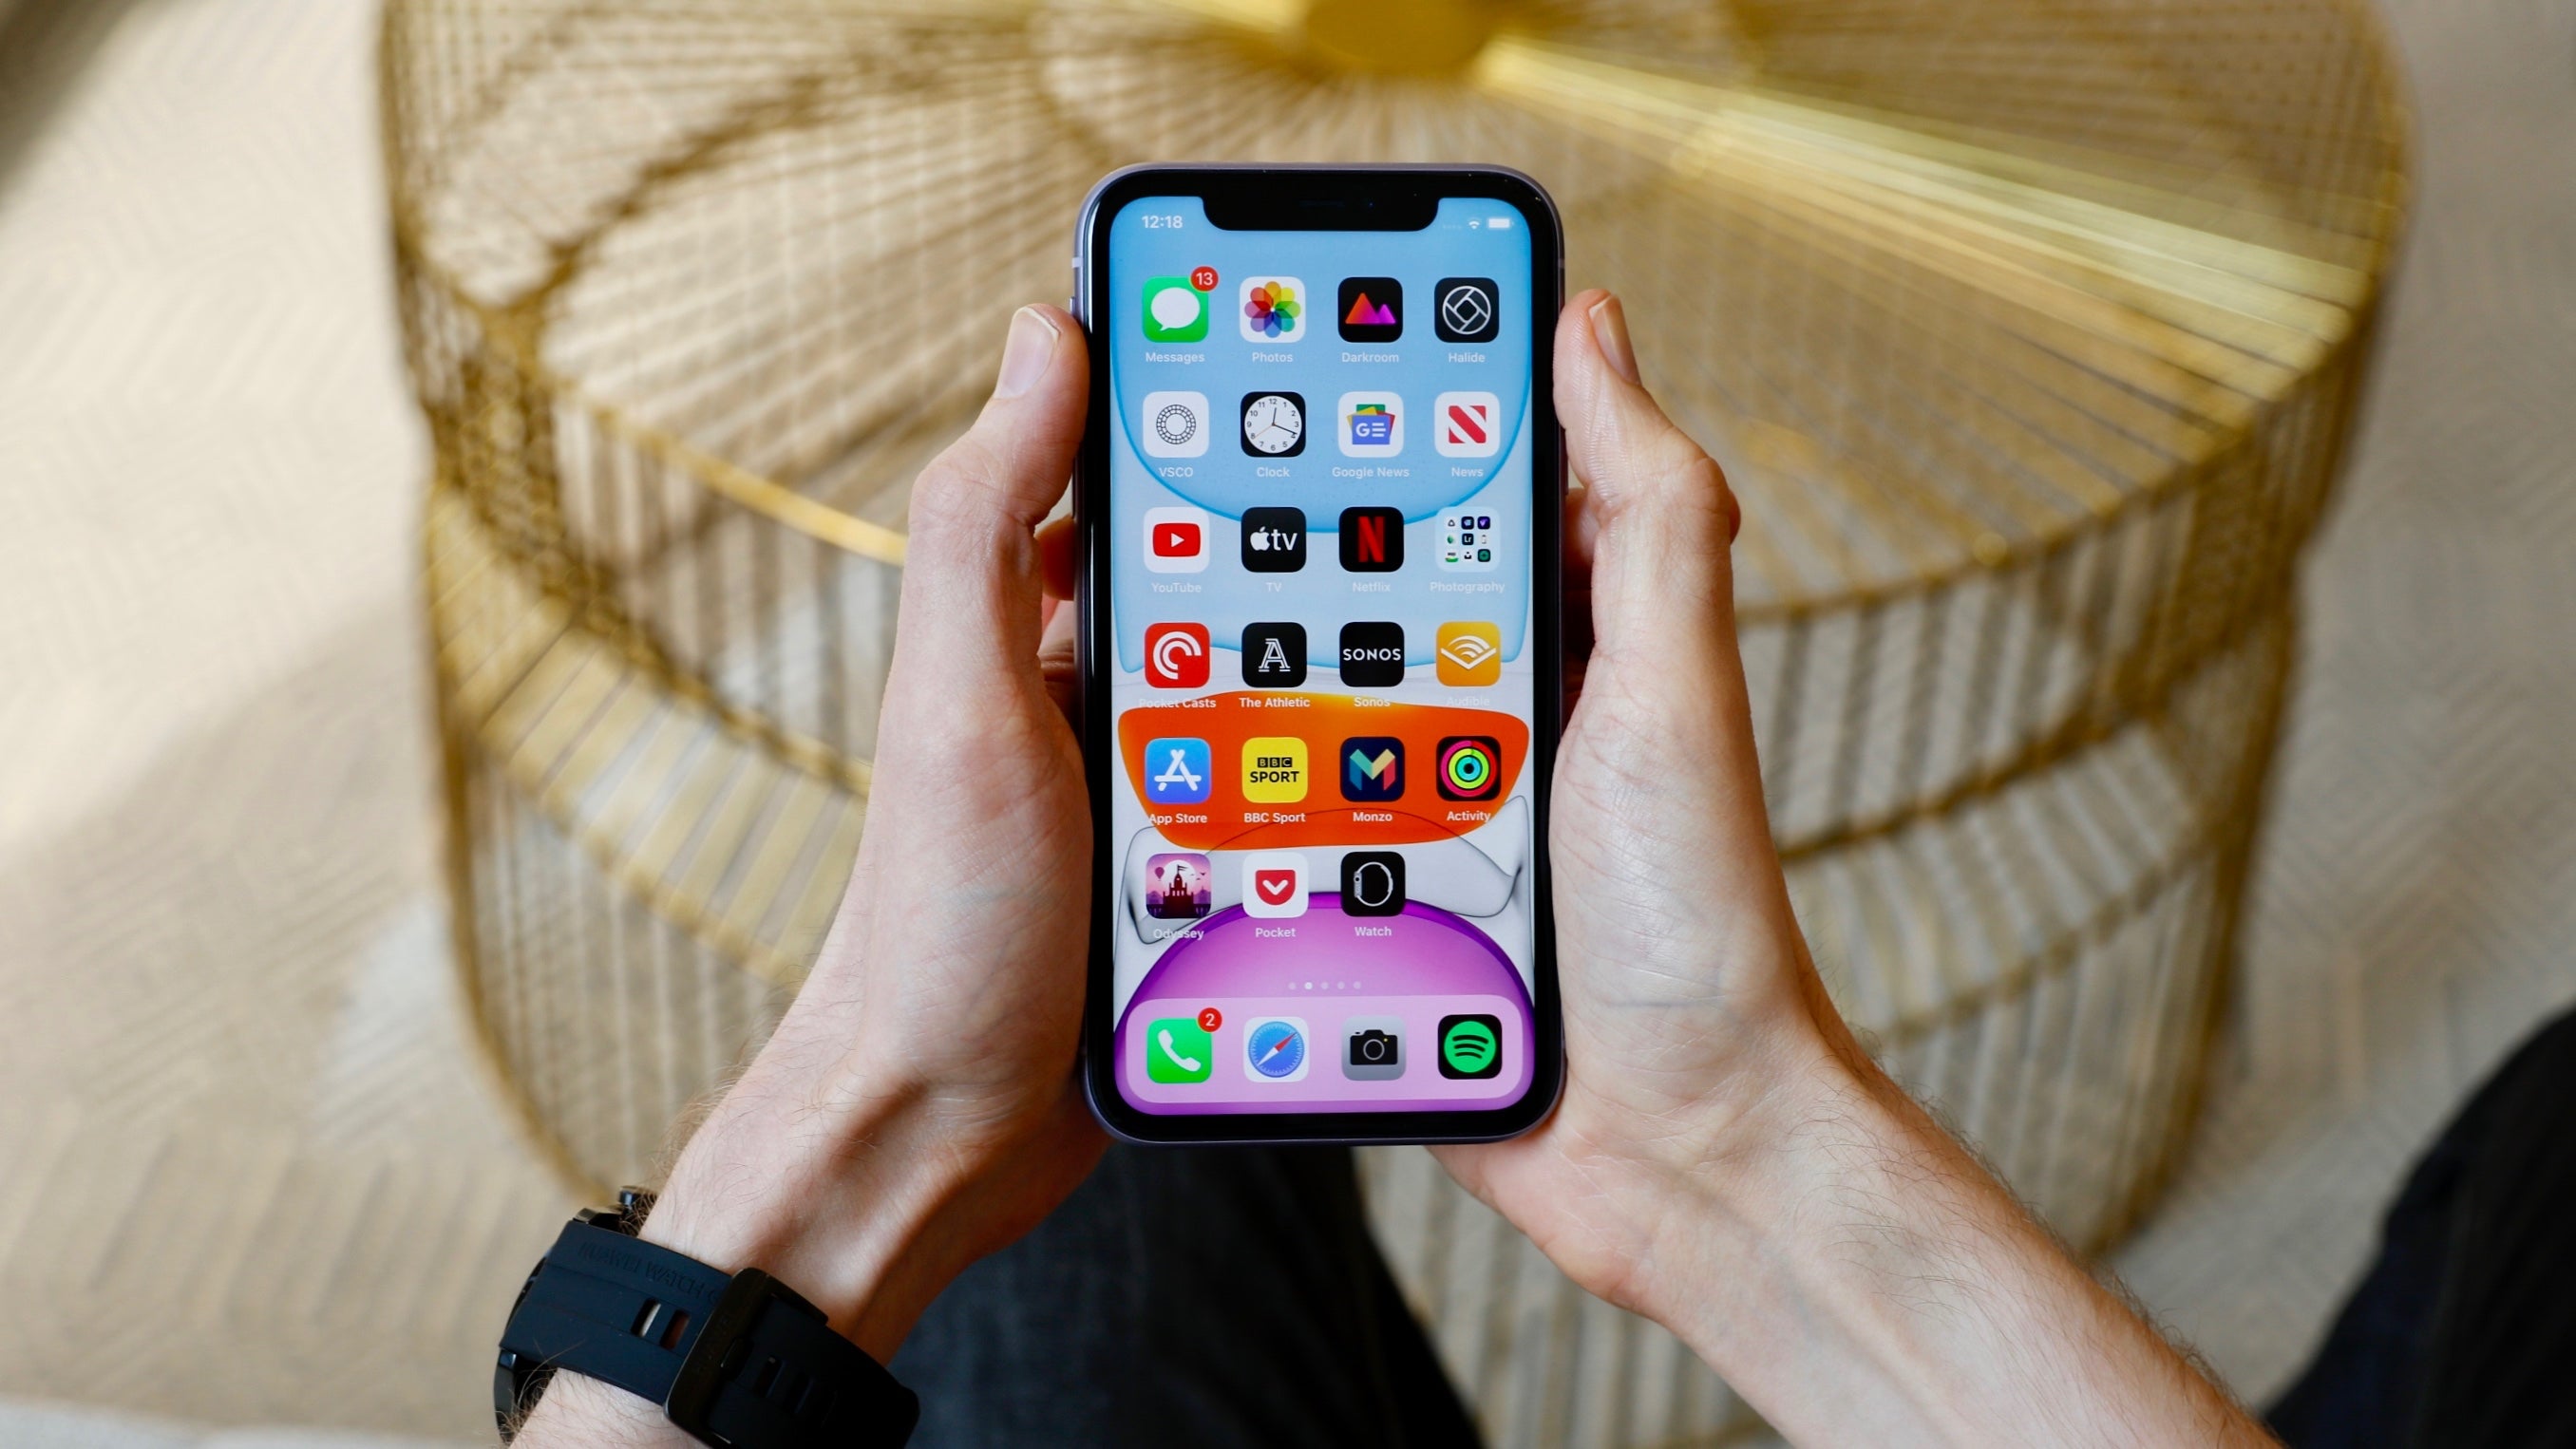 The iPhone 11 Black Friday deal you’ve been waiting for is here